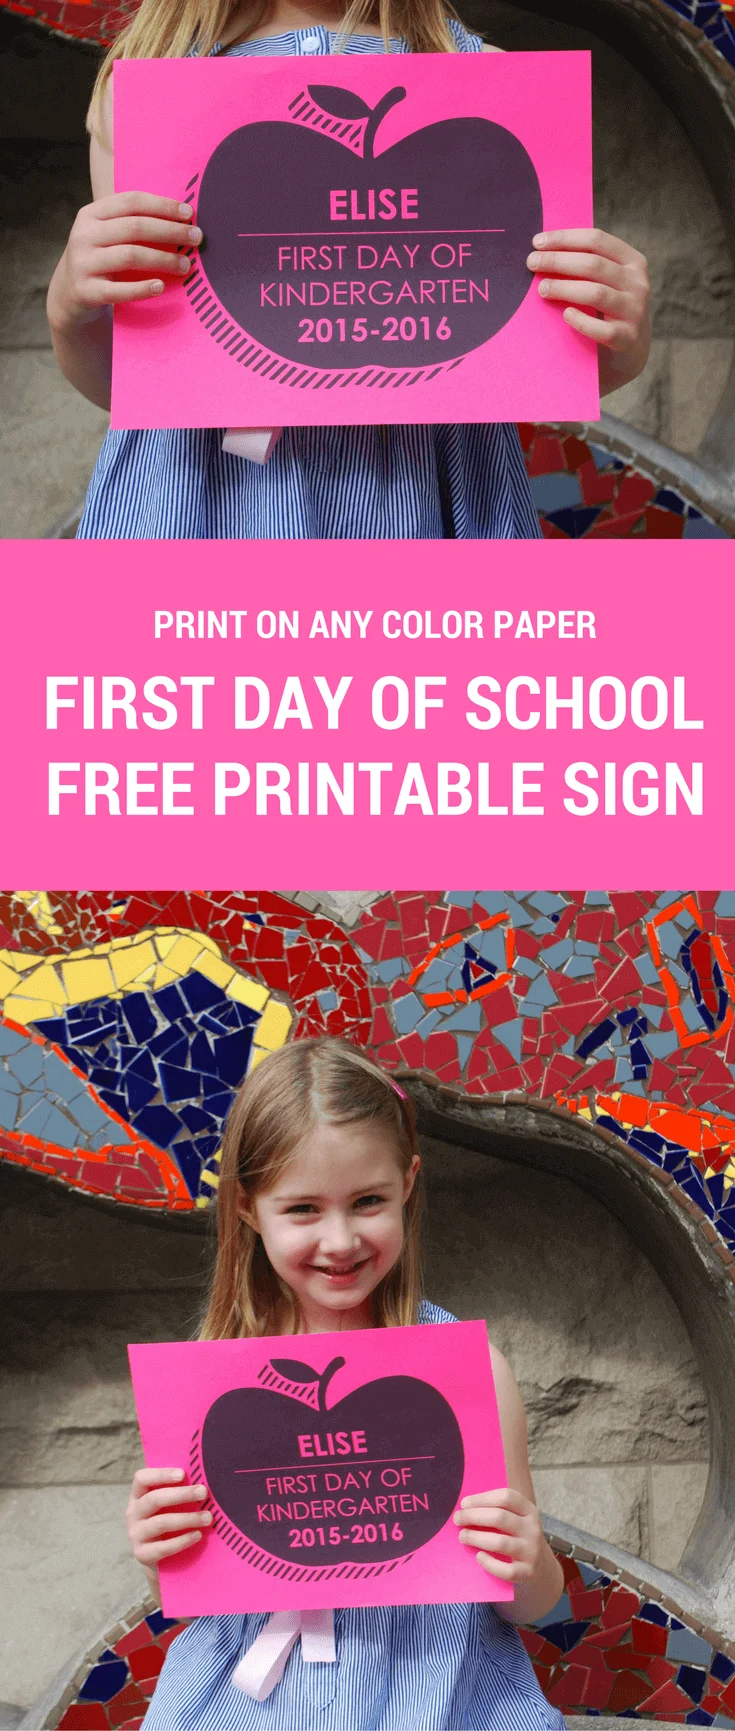 Free Personalized First Day of School printable sign. Just download, type to personalize, and print on any color paper you wish!